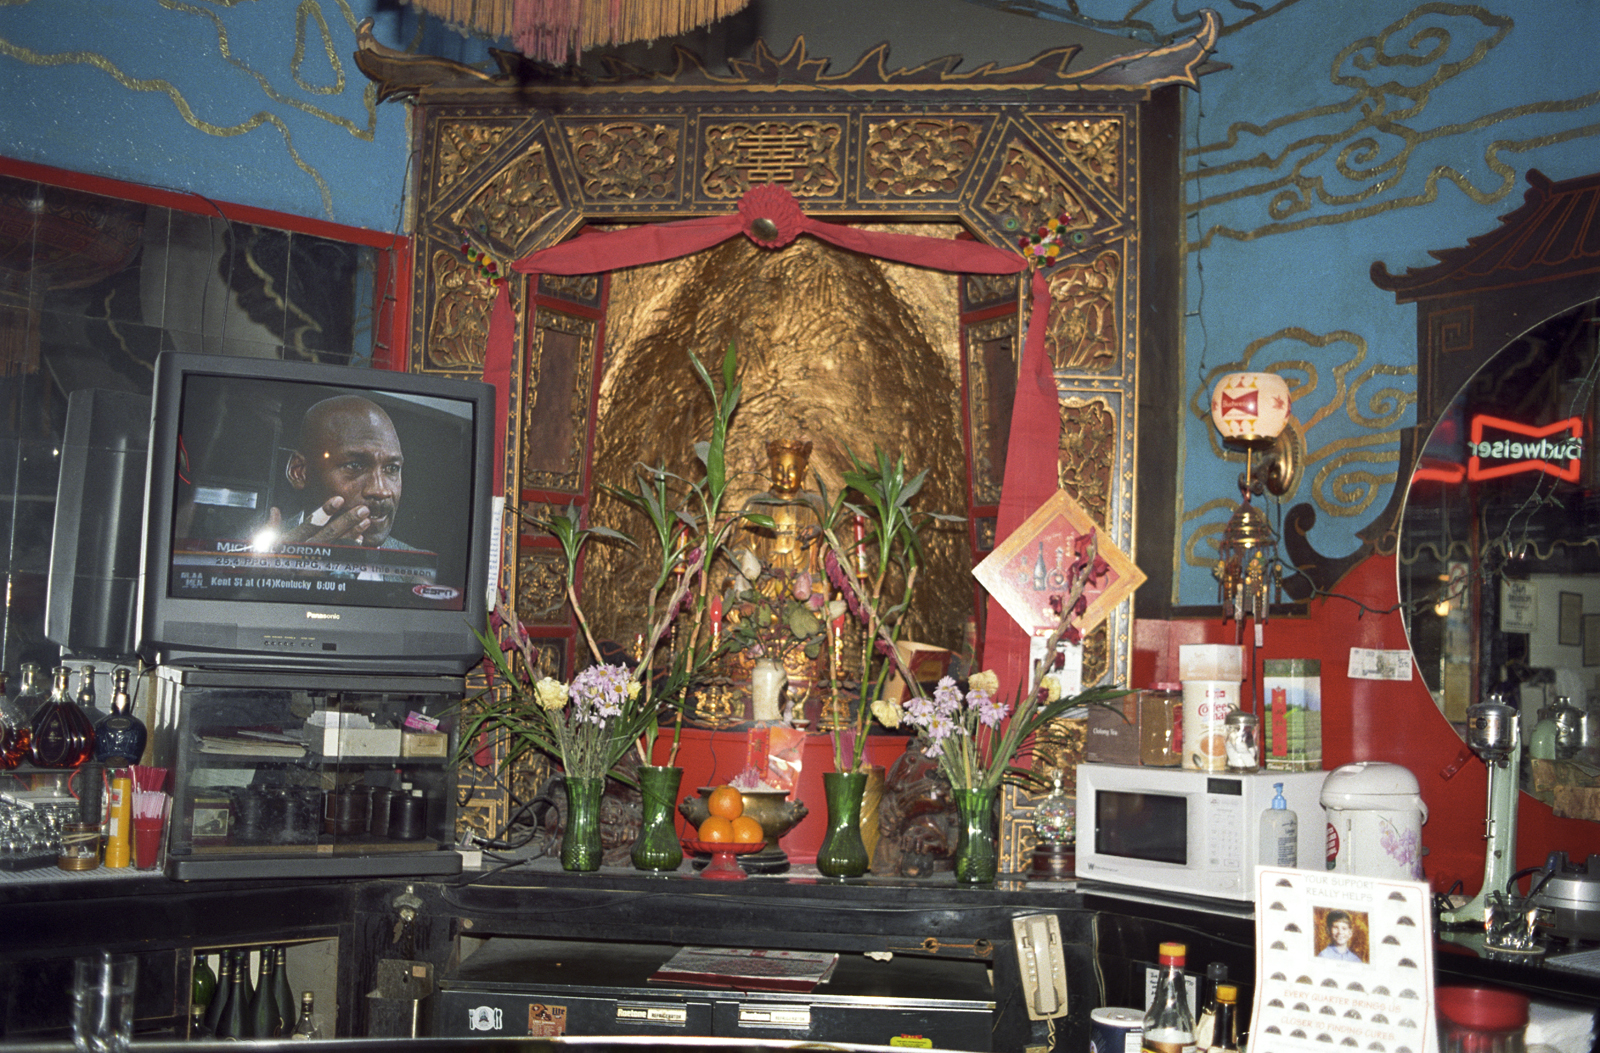 Photograph of a gold-toned Buddhist altar, draped with red, with green vases containing flowers in front. On the left is a television, showing the face of a dark-skinned man; on the right is a round mirror showing the reflection of a neon Budweiser sign.